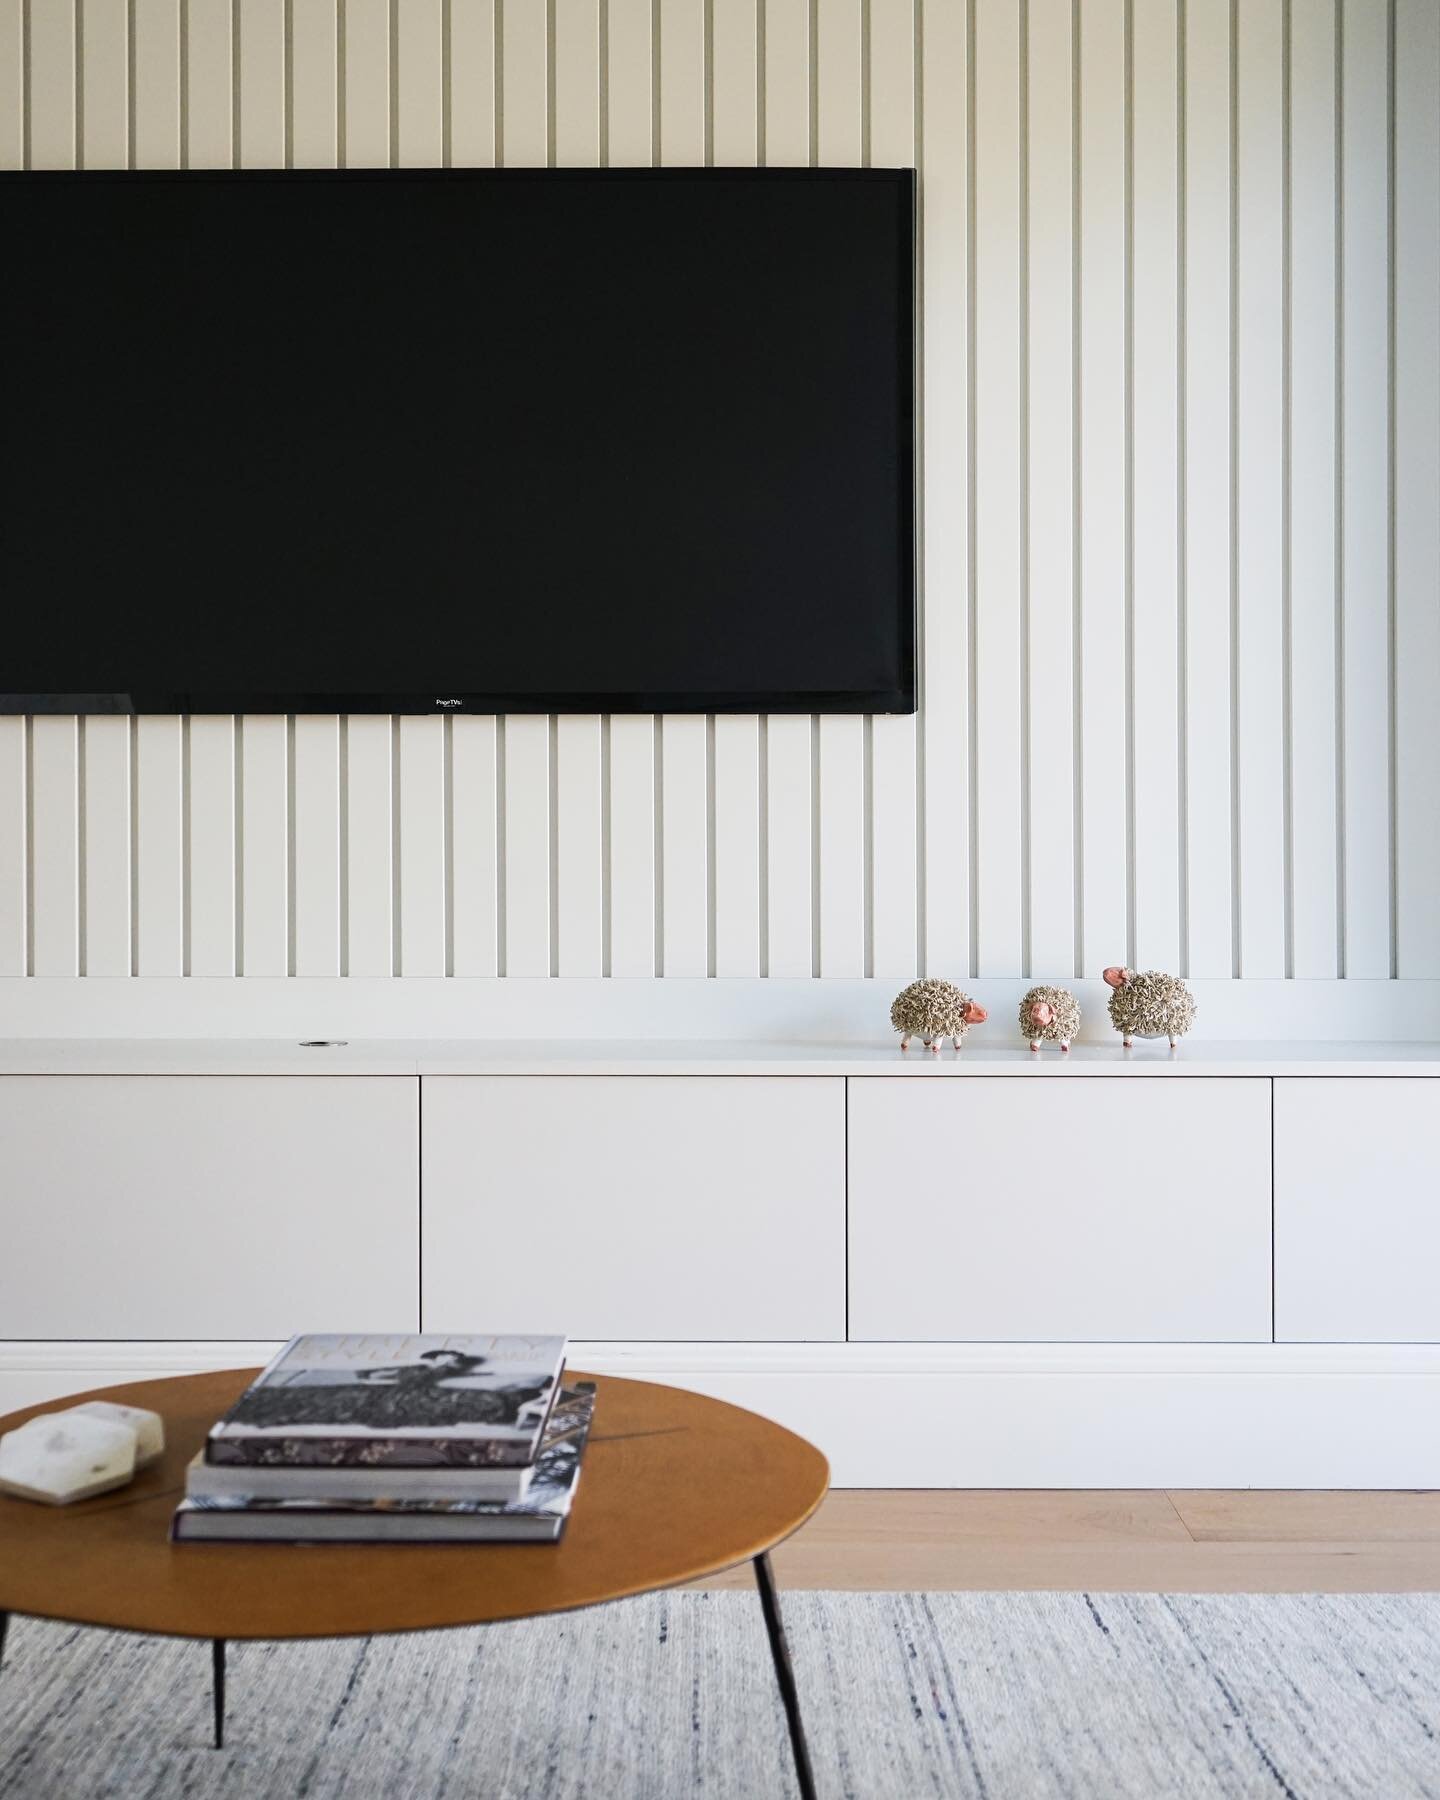 ENTERTAIN
A subtle panelled wall with built-in lower cabinets creates a minimal and functional entertainment feature wall
⌂
⌂
⌂
#designbuild #architect #interiors #bhausliving #houses #interiordesign #luxuryhomes #modern #entertainment #craftsmanship